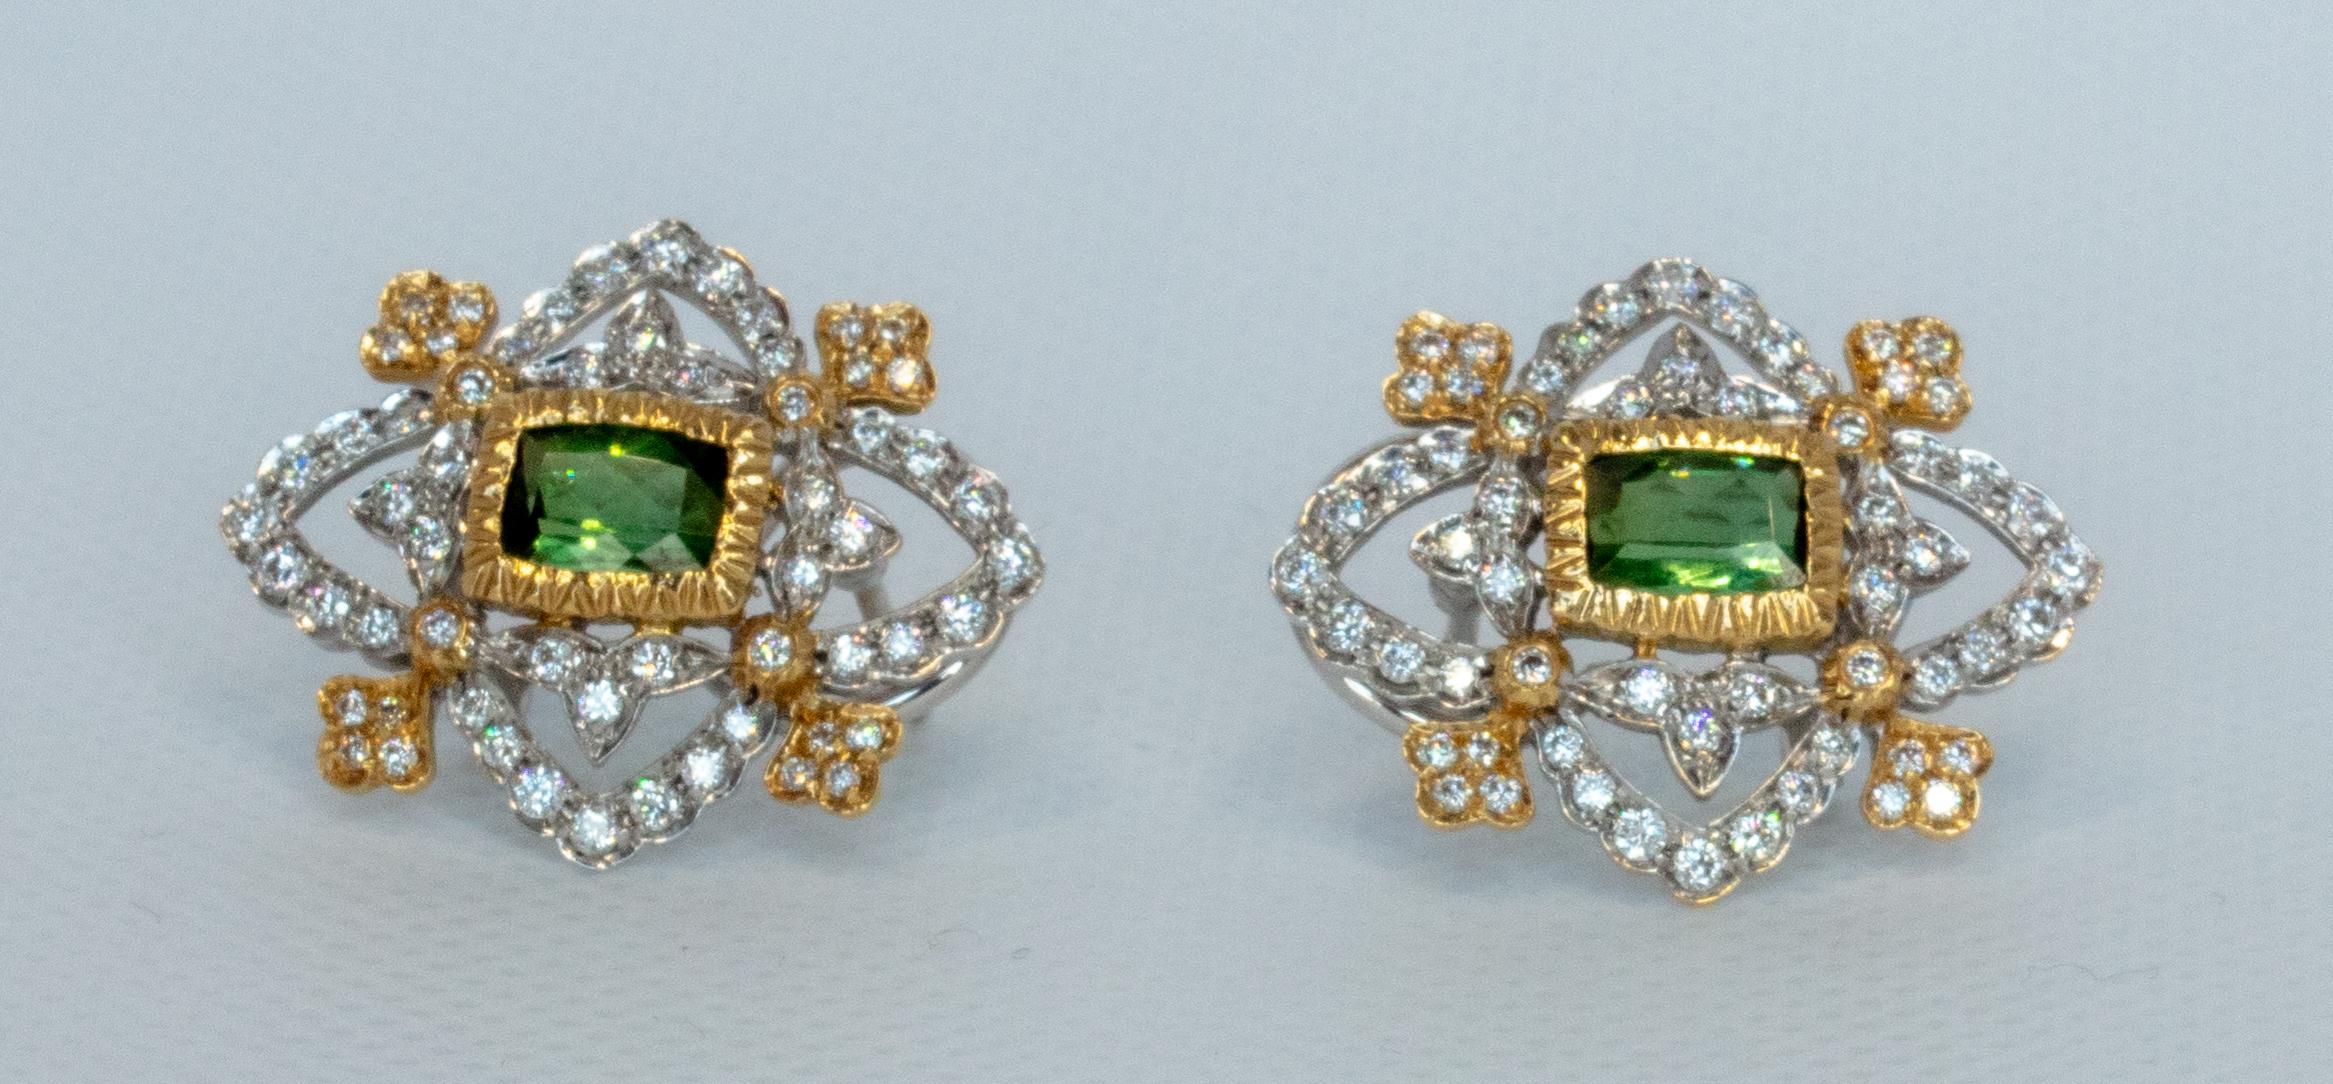 The best kind of statement earrings, these completely authentic earrings are a timeless classic that will age well and be cherished for generations. The unexpected curves, the exquisite cut pair of Afghan tourmalines, the elegantly executed hand